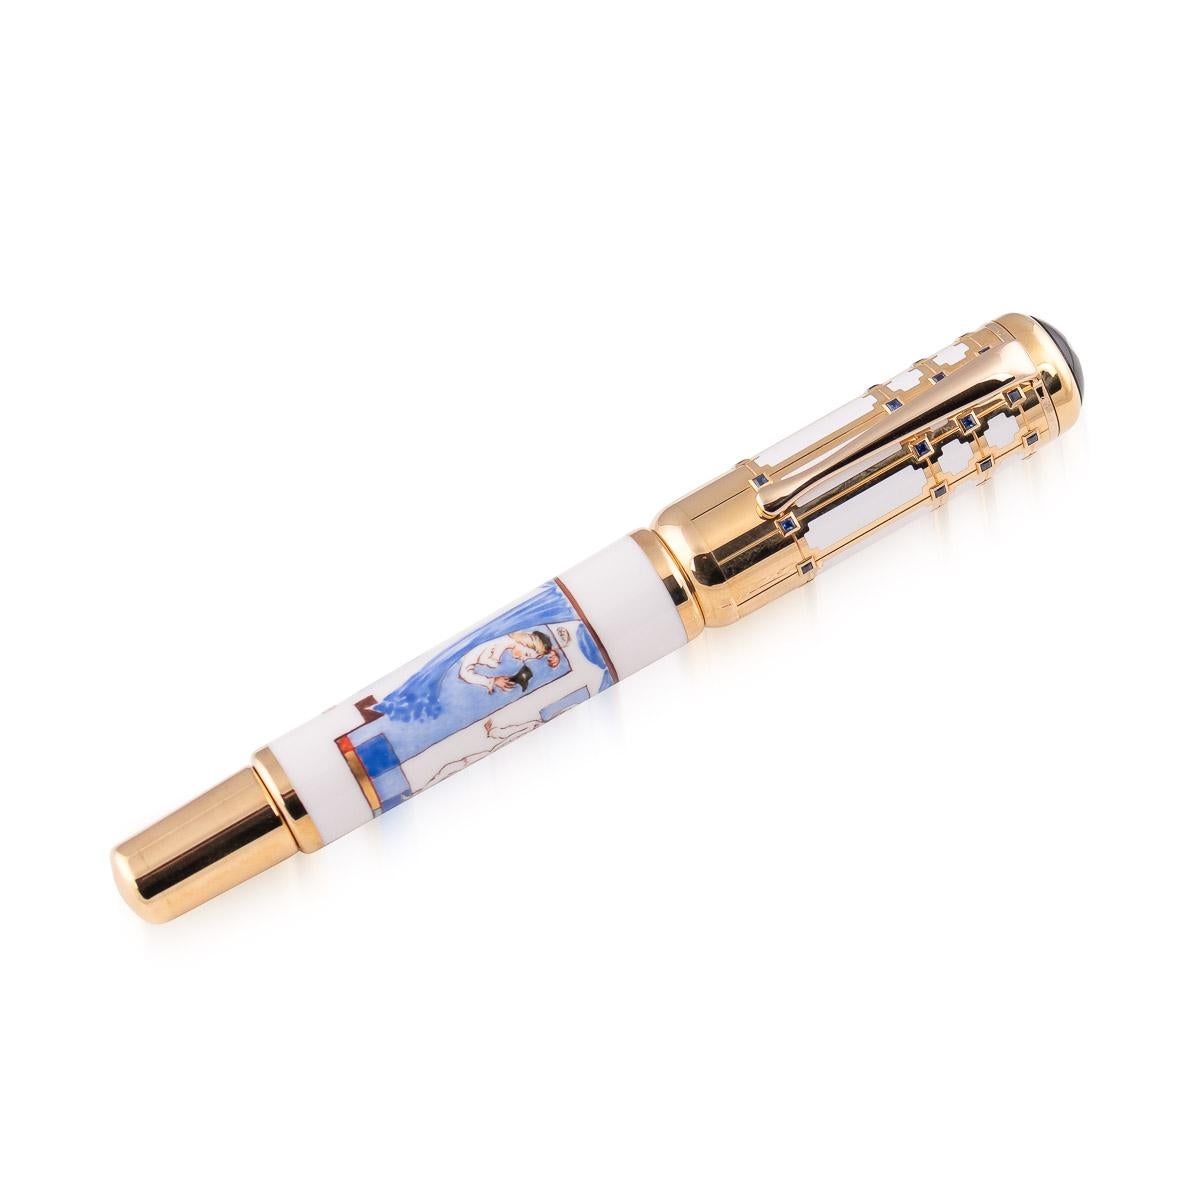 Montblanc very rare Limited Edition Fountain Pen, dedicated to Max Reinhardt in support of the 